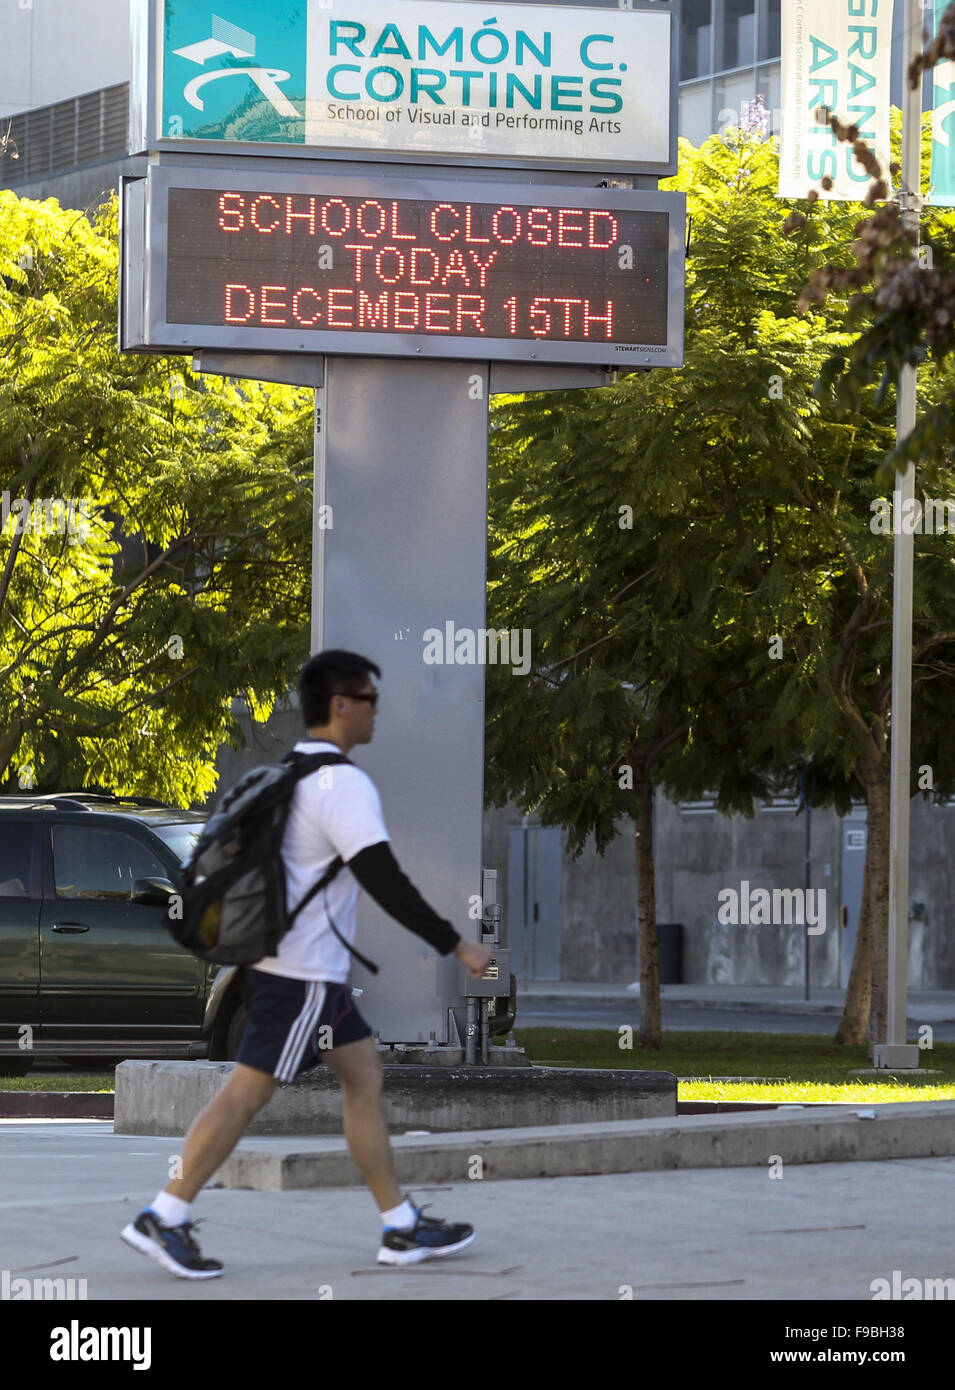 Los Angeles, California, USA. 15th Dec, 2015. A sign shows the school is closed at the Ramon Cortines School of Visual and Performing Arts. Responding to an 'electronic threat' emailed to multiple members of the school board and campuses, all Los Angeles Unified School District campuses were closed today and a massive effort began to search the roughly 900 schools in the district. © Ringo Chiu/ZUMA Wire/Alamy Live News Stock Photo